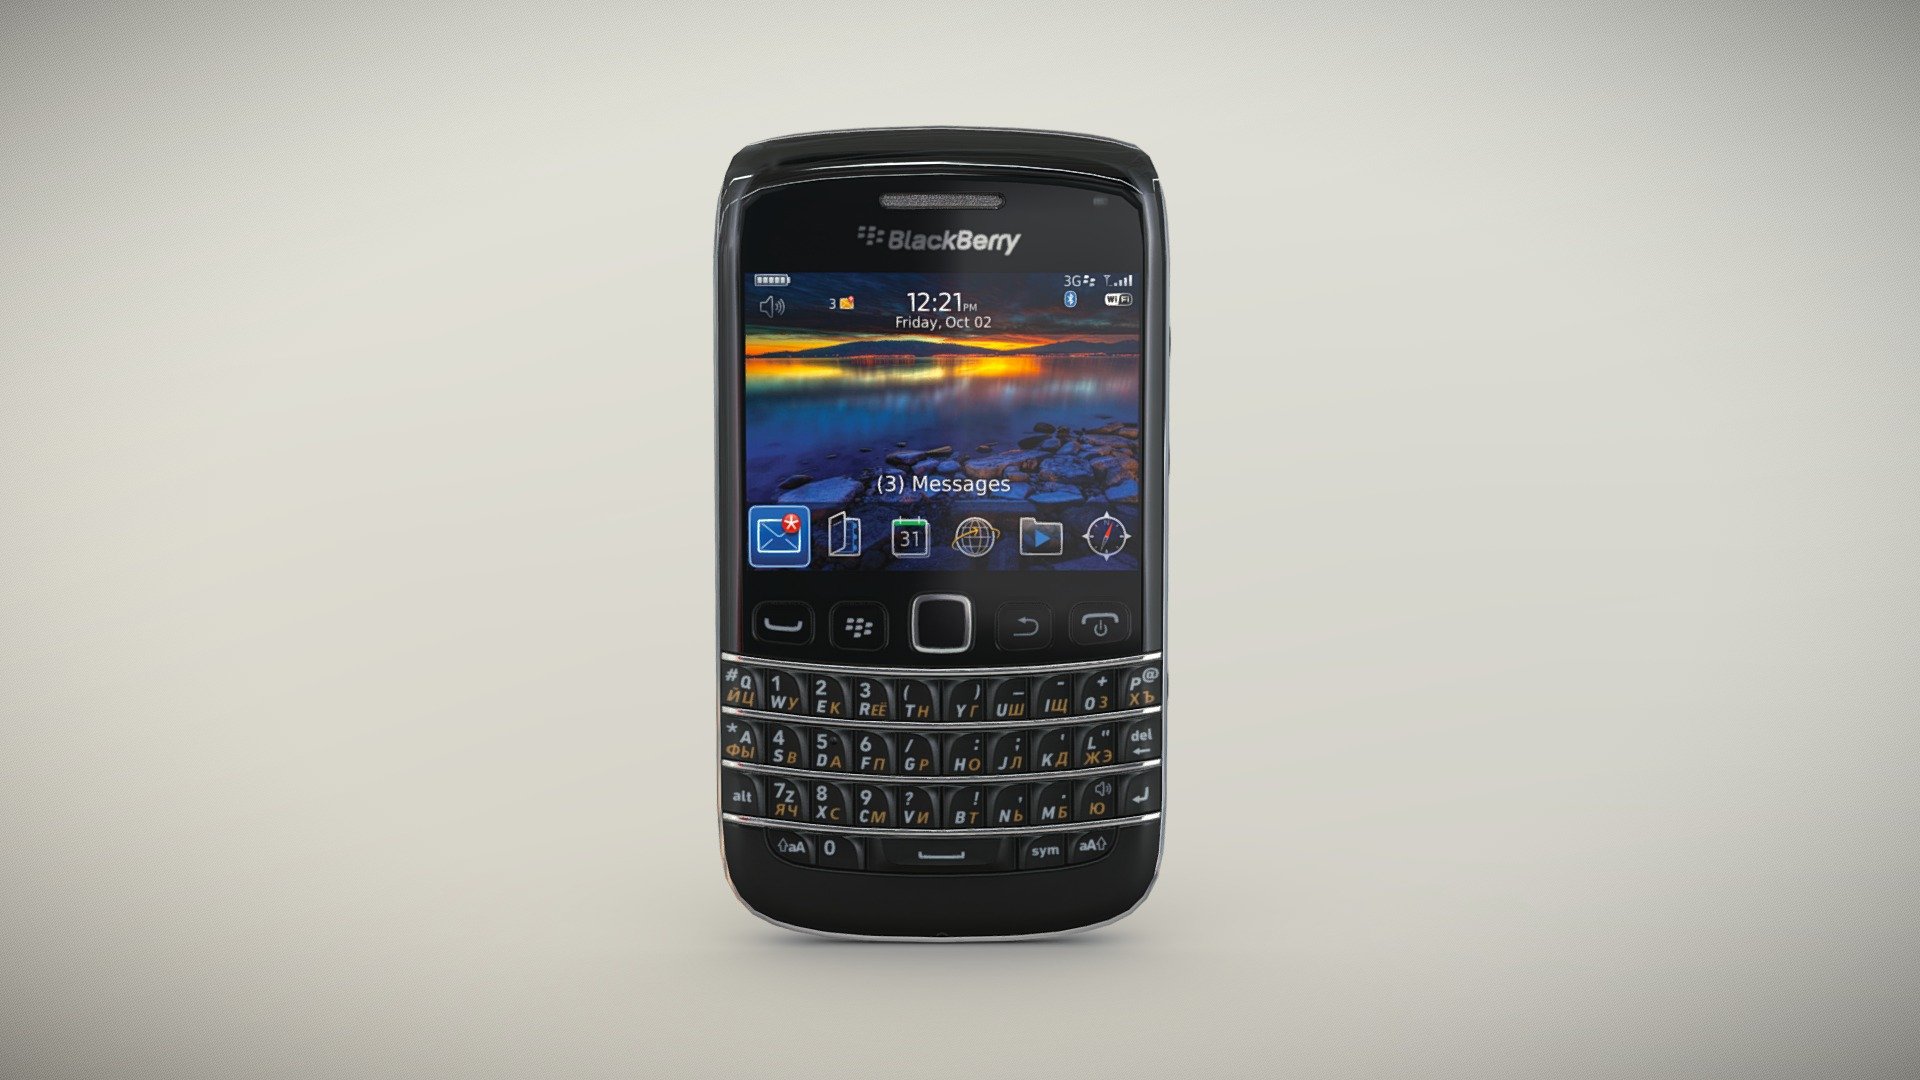 •   Let me present to you high-quality low-poly 3D model BlackBerry Bold 9790 Black. Modeling was made with ortho-photos of real phone that is why all details of design are recreated most authentically.

•    This model consists of one mesh, it is low-polygonal and it has only one material.

•   The total of the main textures is 5. Resolution of all textures is 2048 pixels square aspect ratio in .png format. Also there is original texture file .PSD format in separate archive.

•   Polygon count of the model is – 2000.

•   The model has correct dimensions in real-world scale. All parts grouped and named correctly.

•   To use the model in other 3D programs there are scenes saved in formats .fbx, .obj, .DAE, .max (2010 version).

Note: If you see some artifacts on the textures, it means compression works in the Viewer. We recommend setting HD quality for textures. But anyway, original textures have no artifacts 3d model